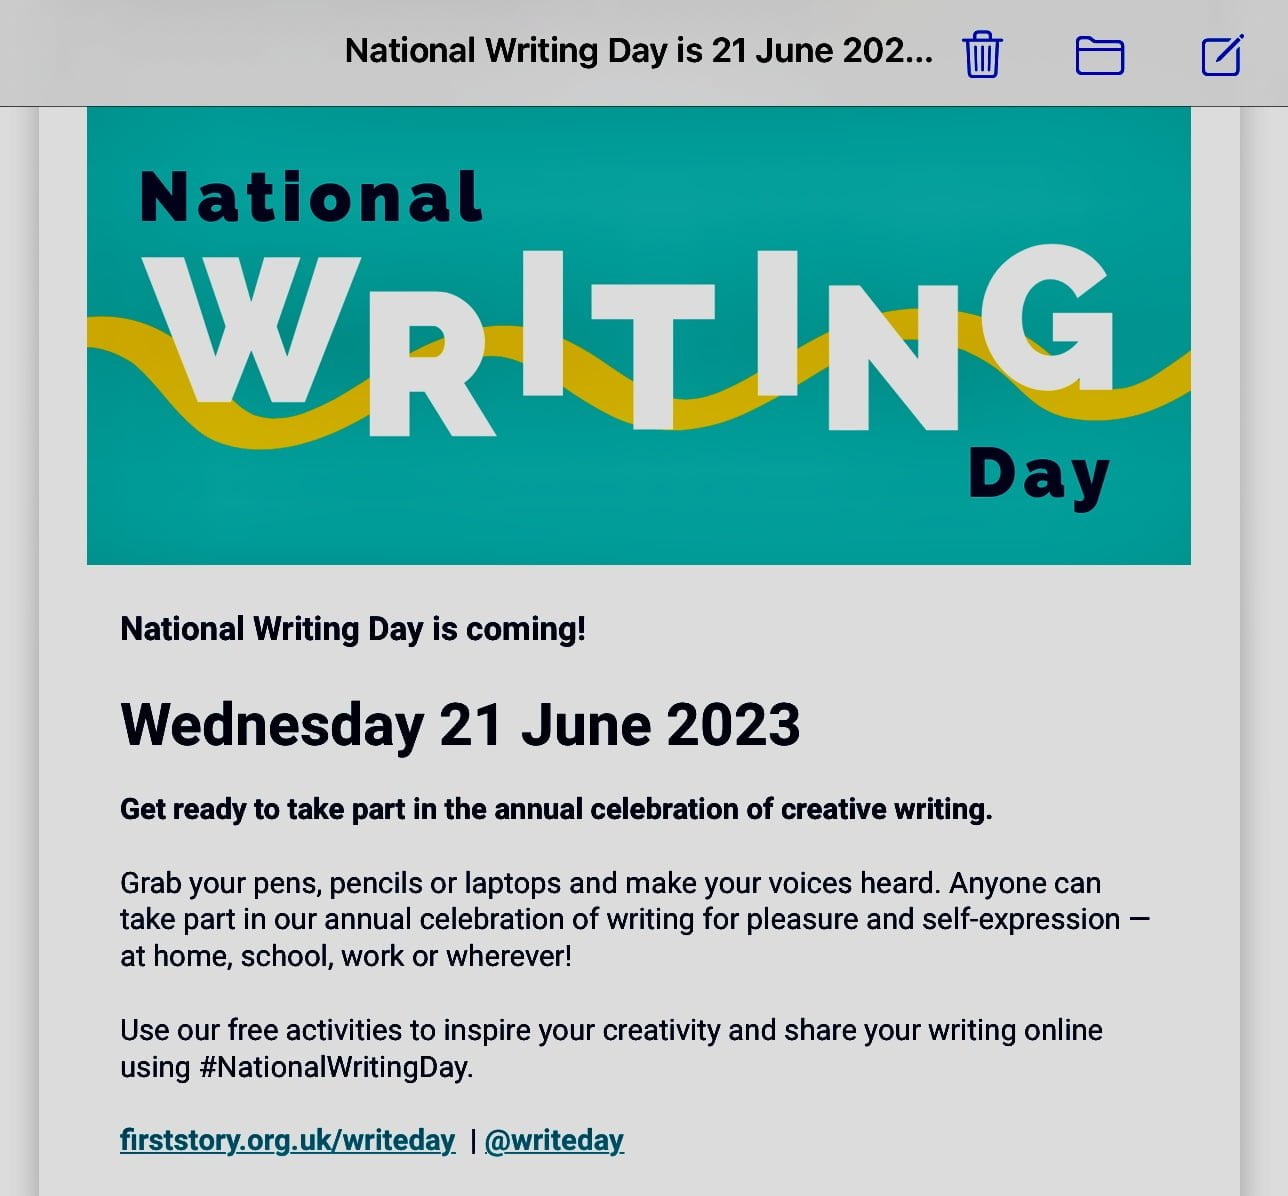 NATIONAL WRITING DAY